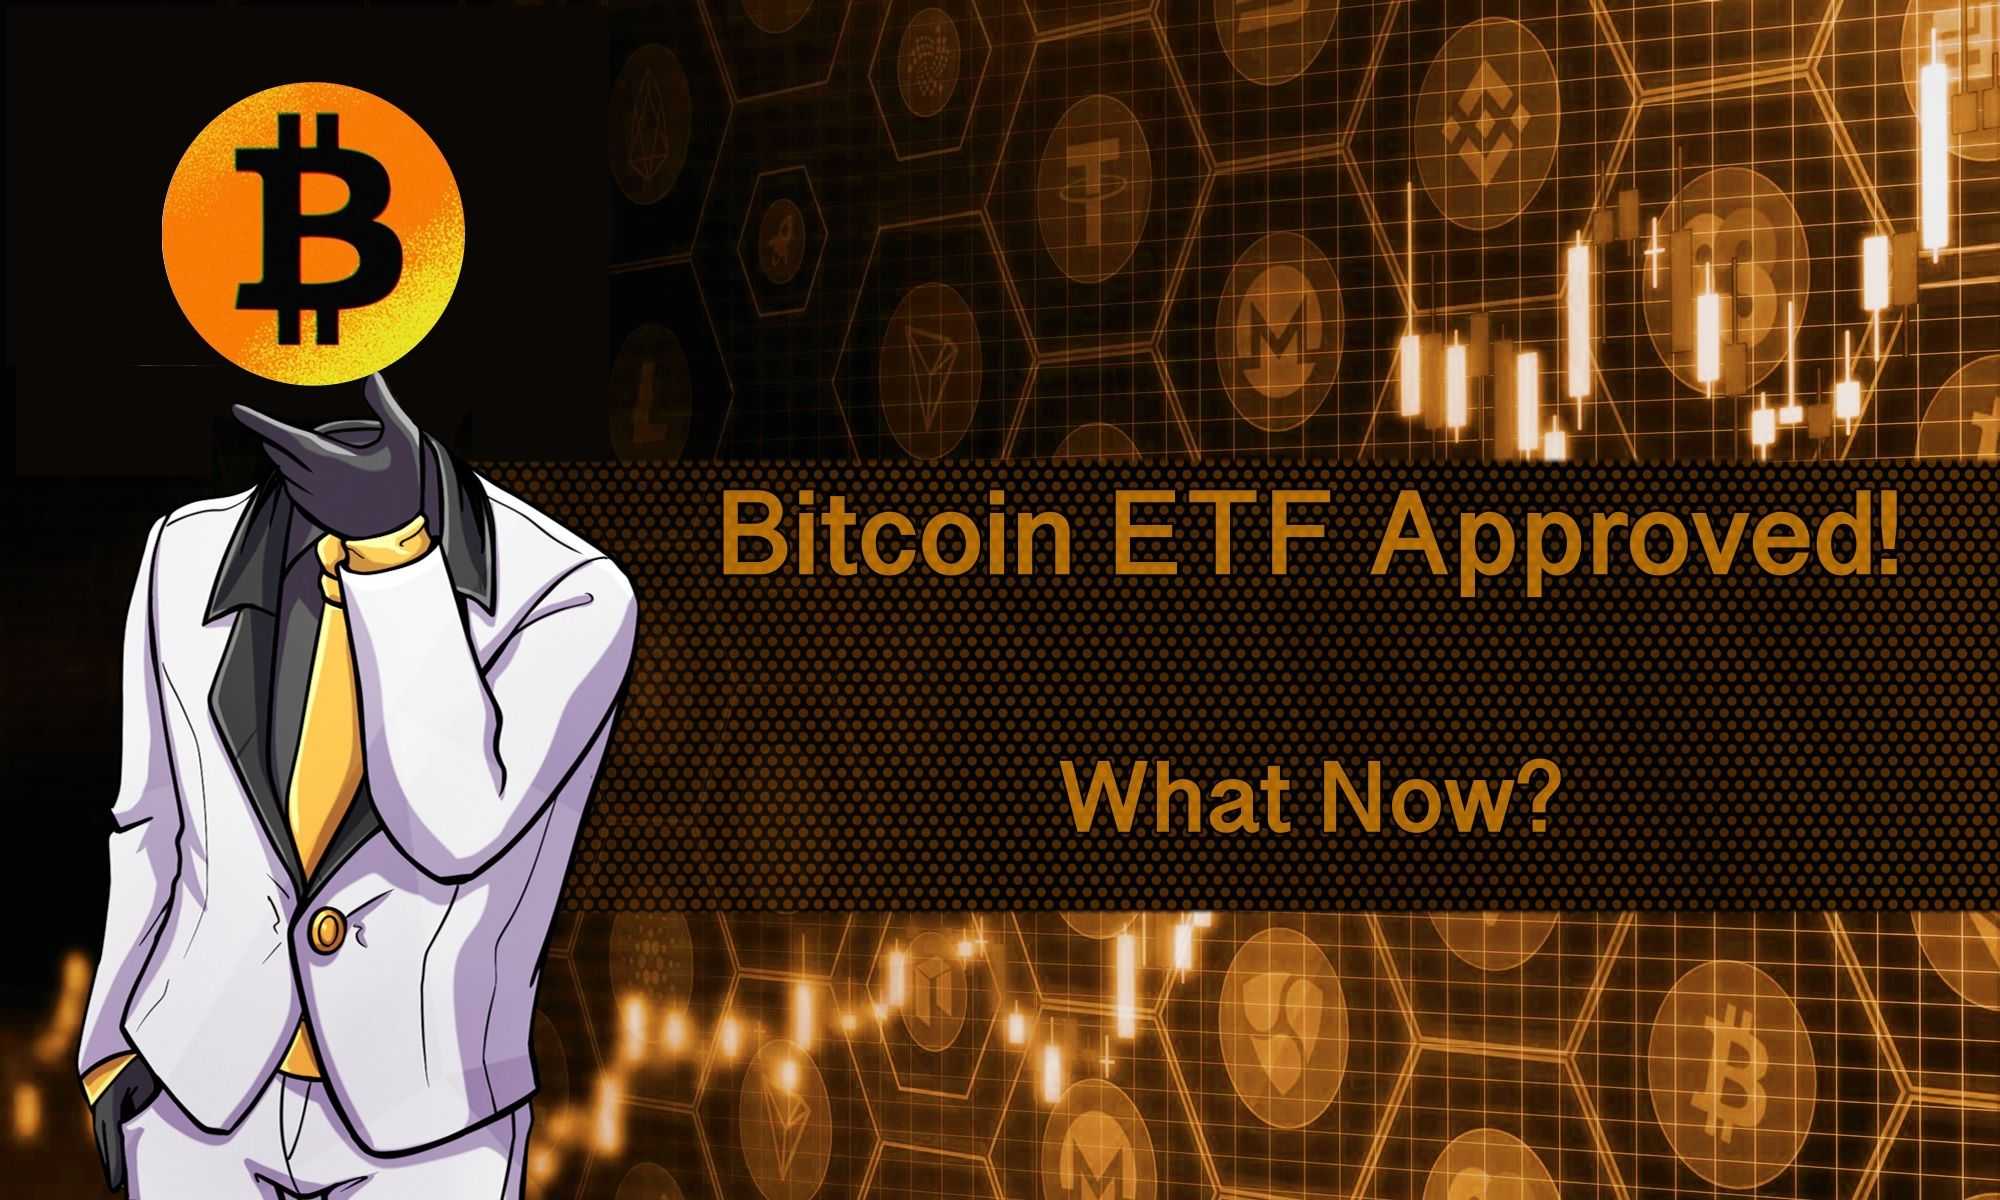 Bitcoin ETF Approved! What Now?